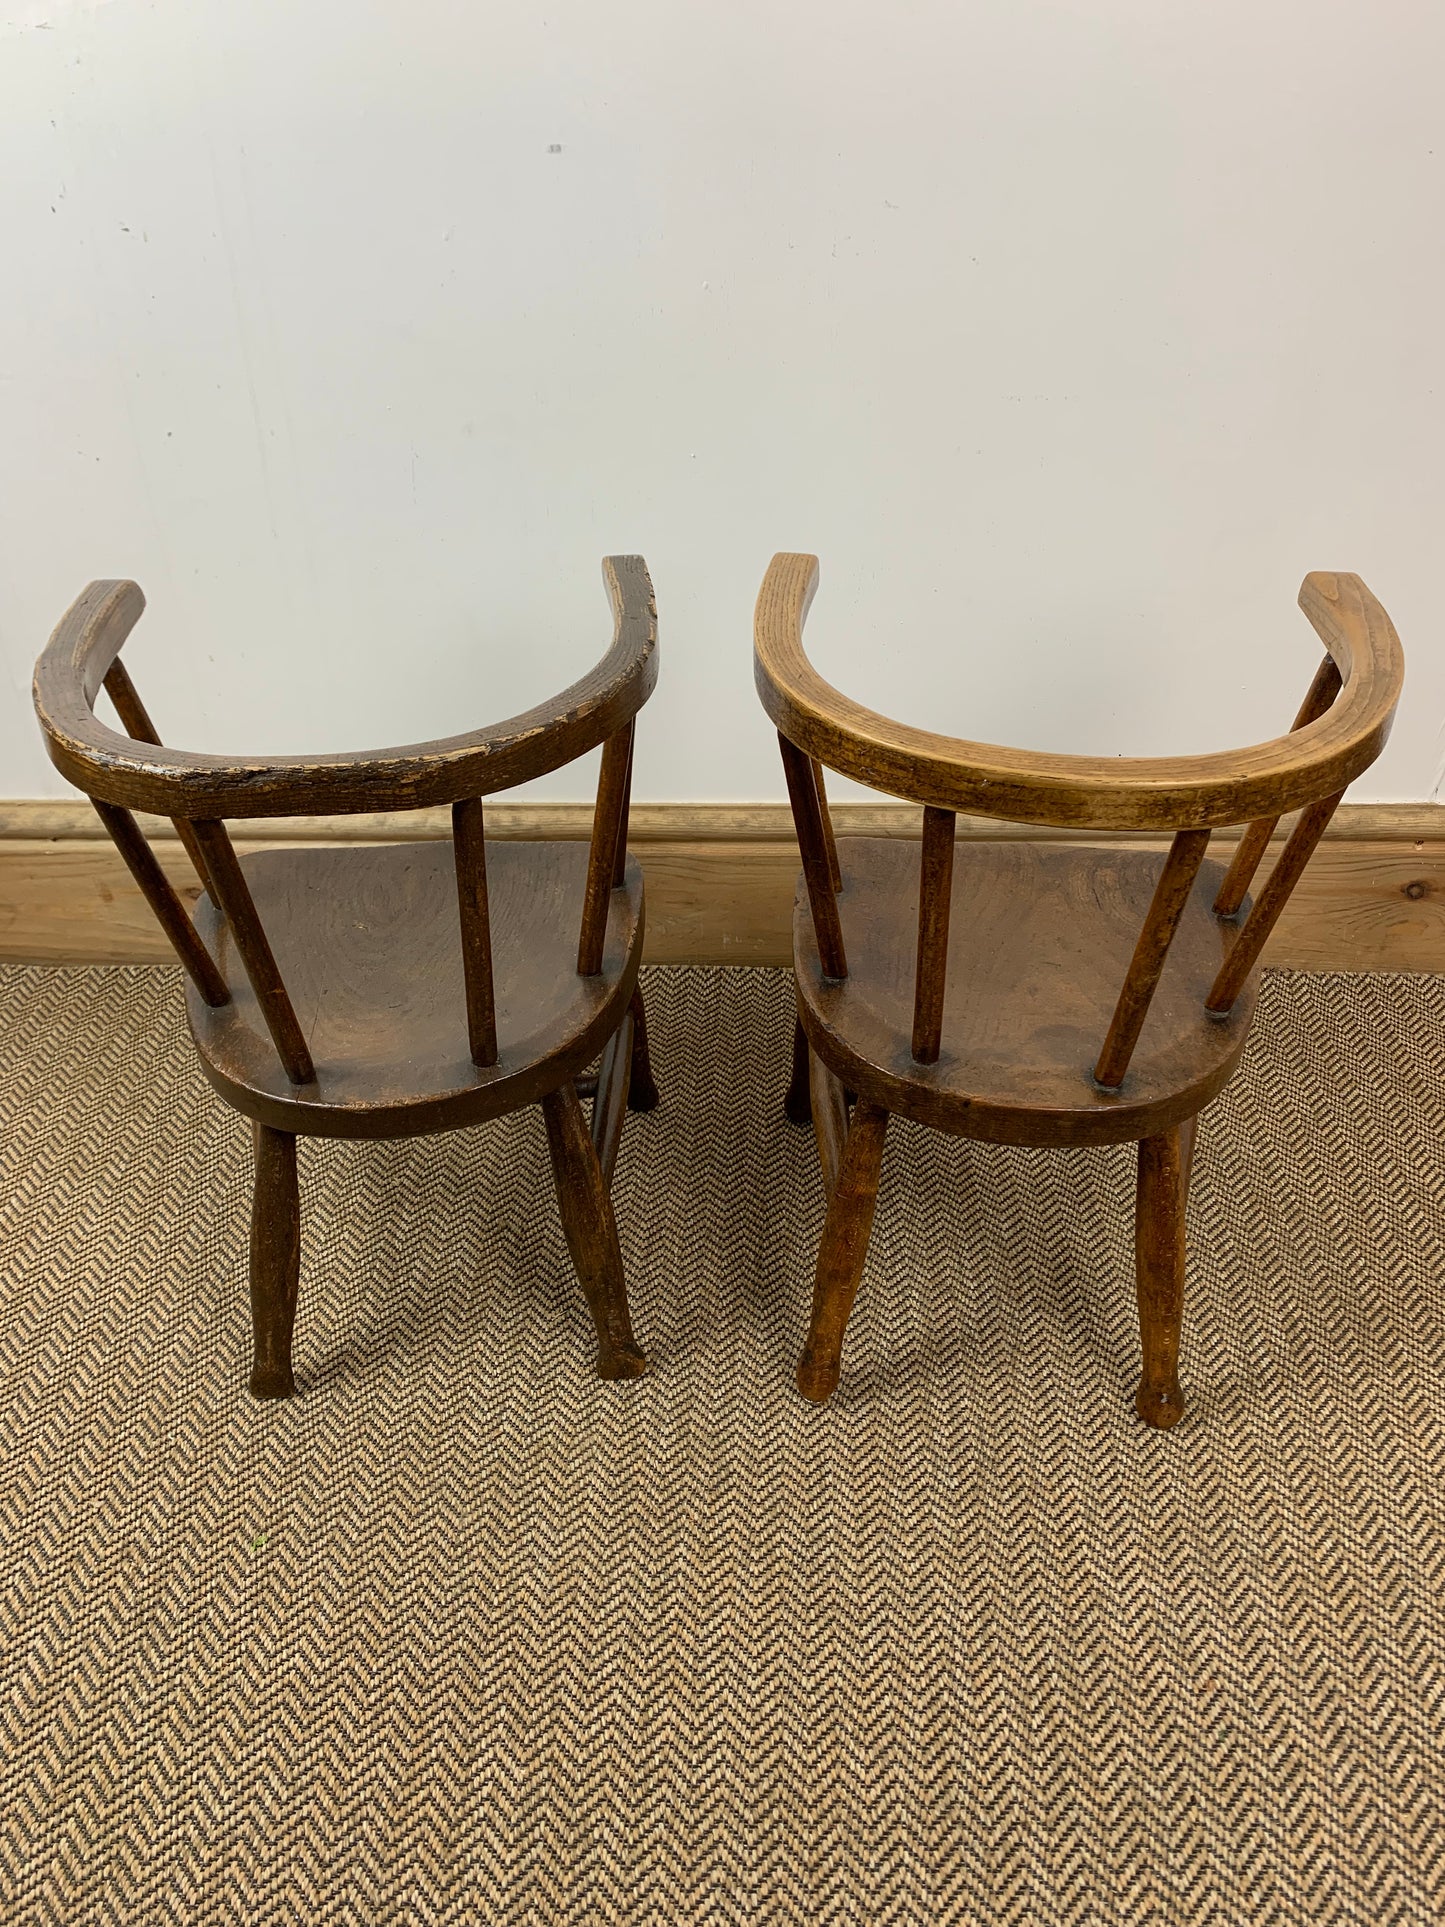 Pair of Edwardian Child's Chairs: Vintage Elegance for Little Ones